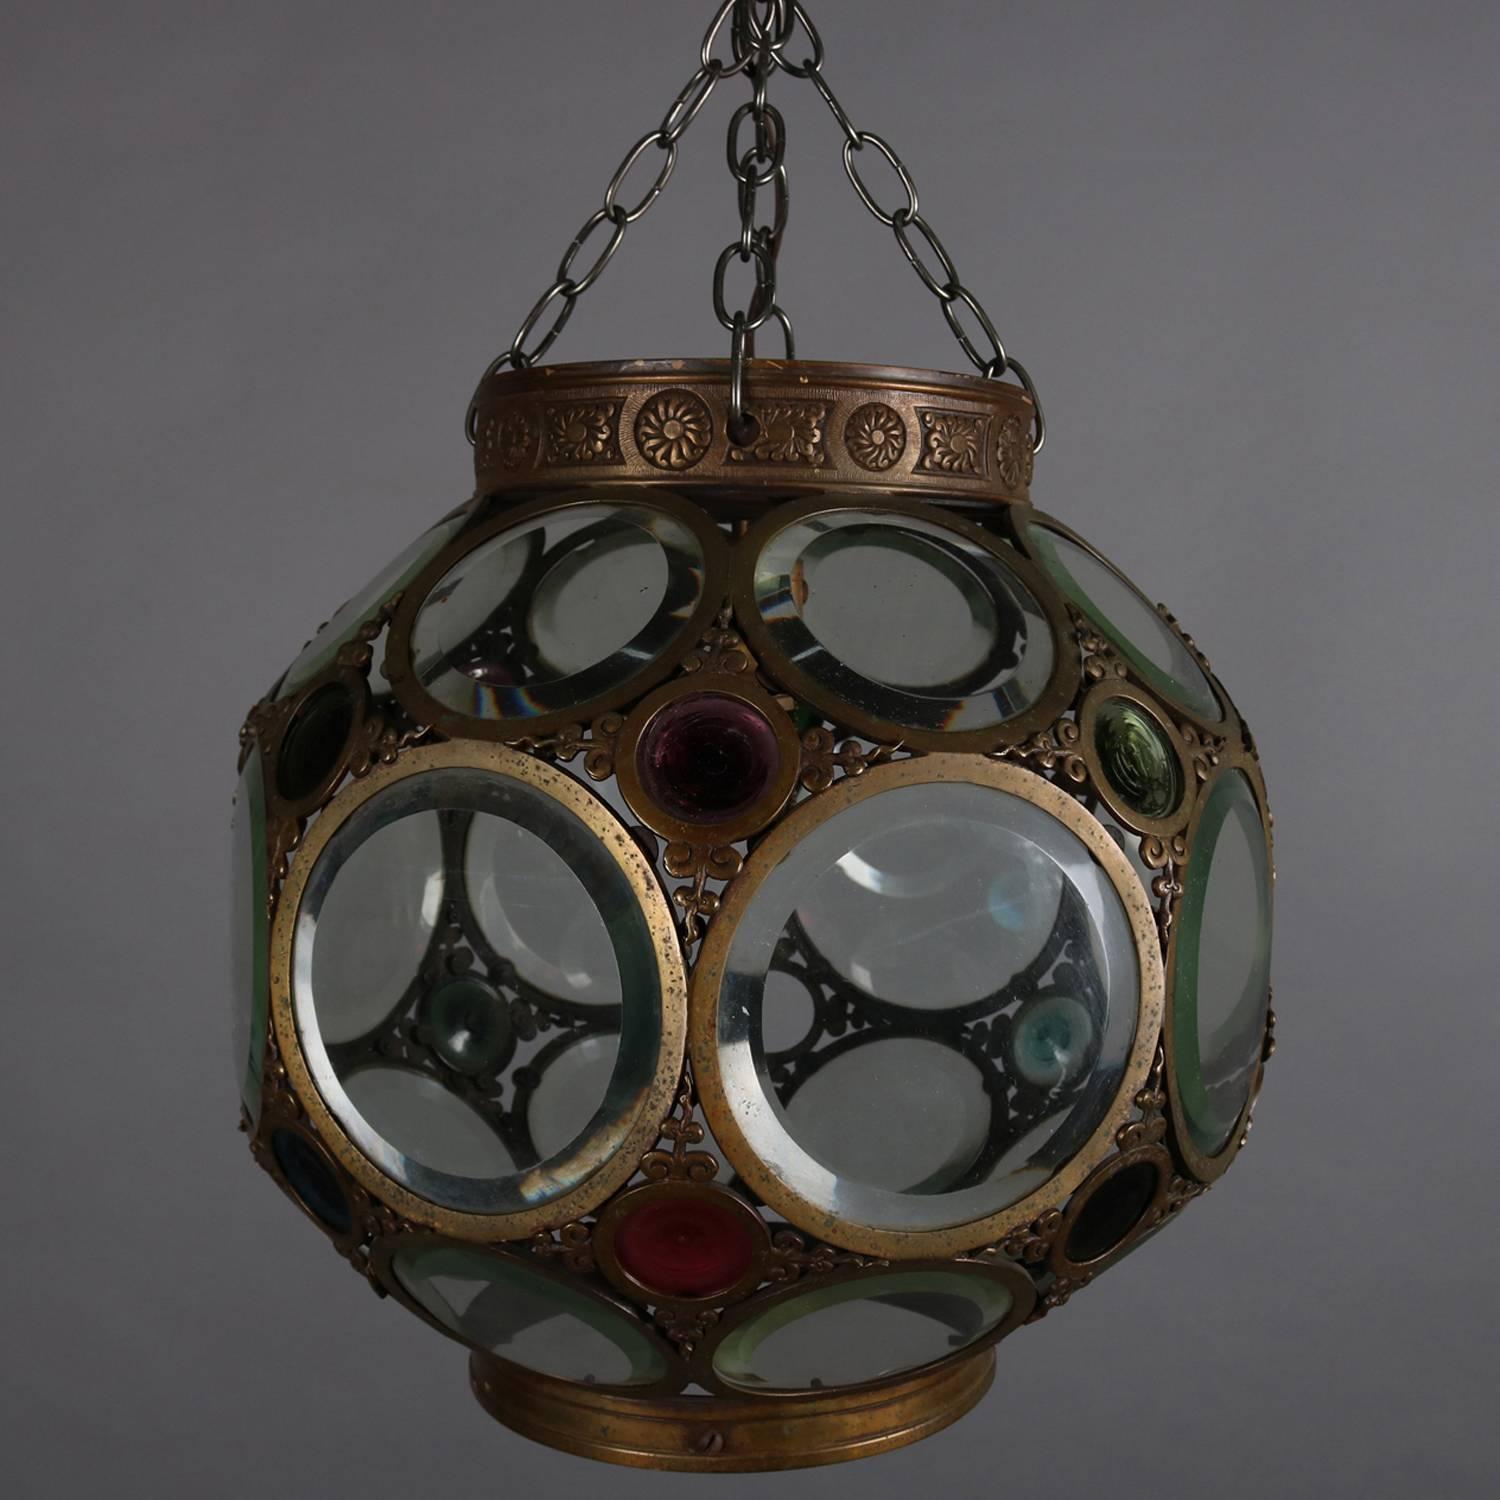 Large and heavy Aesthetic Movement belchers school hanging hall light features bronzed spherical form and pierced frame with insets of beveled and jeweled glass, collar with embossed stylized floral and foliate decoration, elements of Arts & Crafts